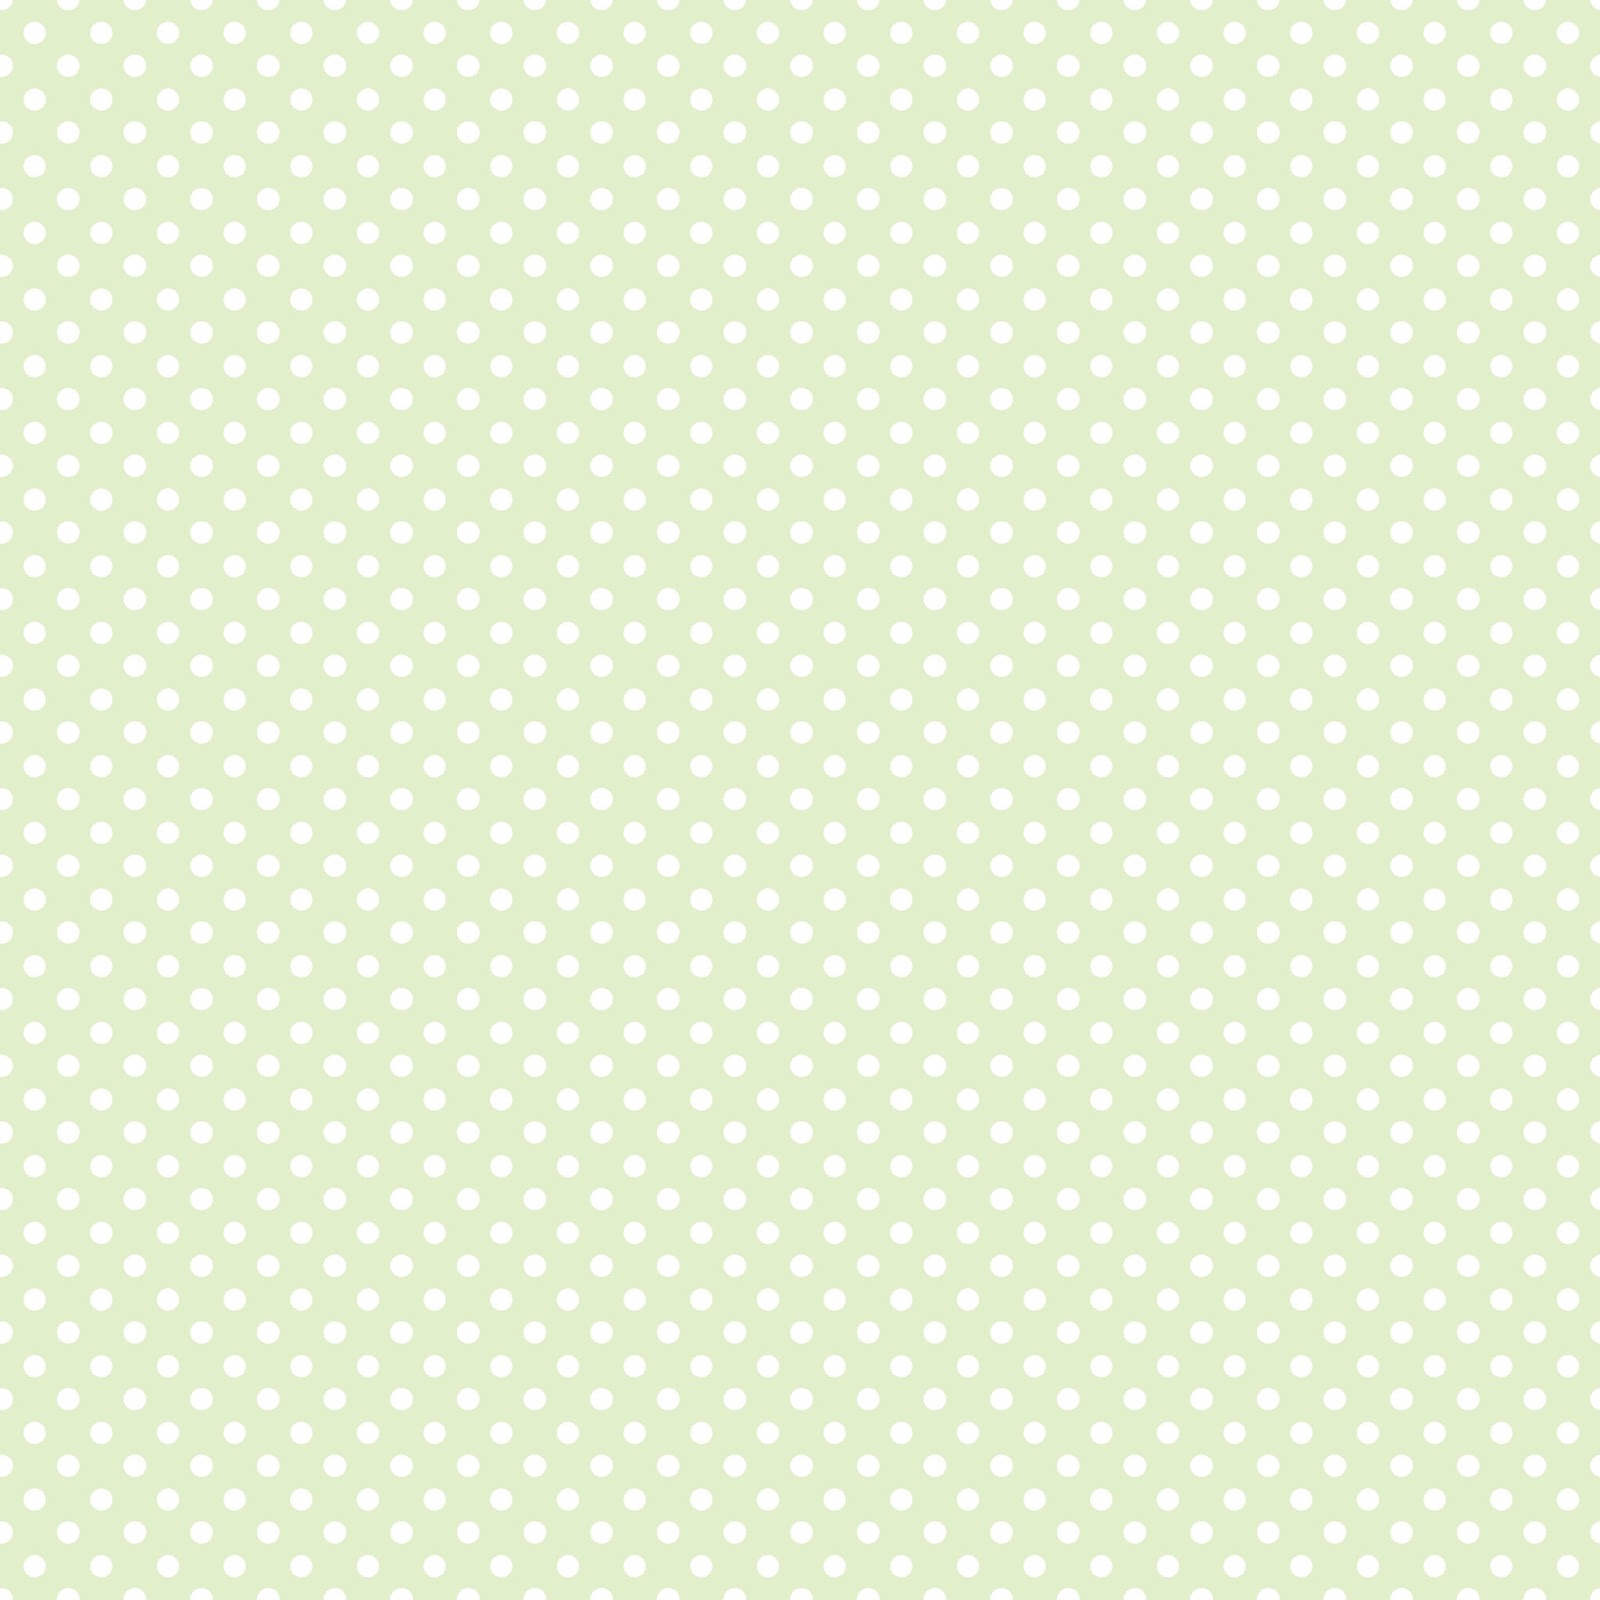 Free Printable Backgrounds For Scrapbooking